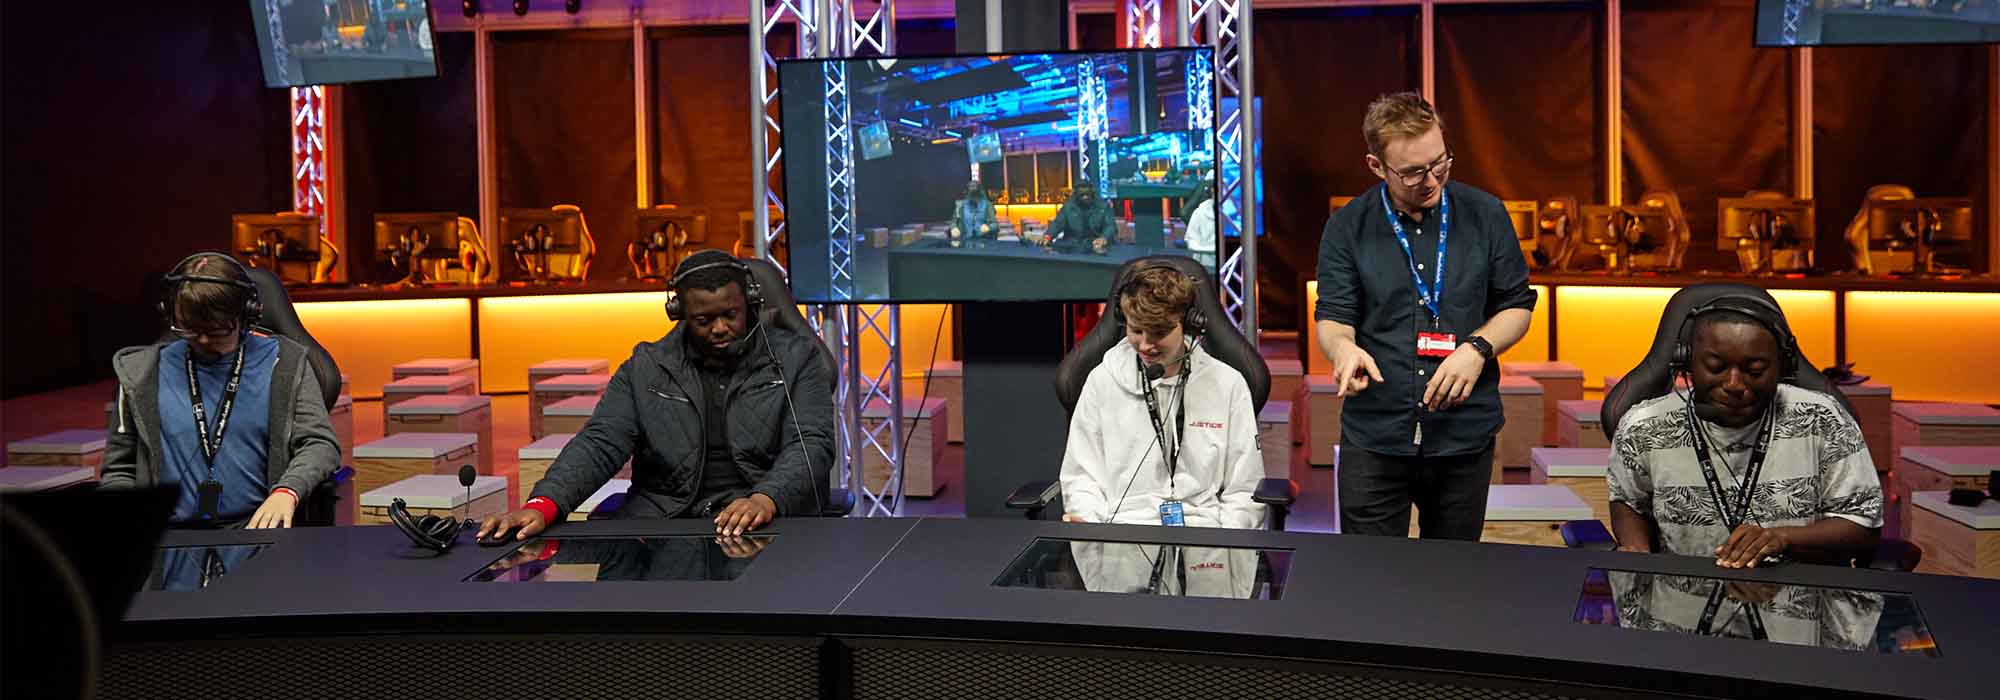 students in the esports arena